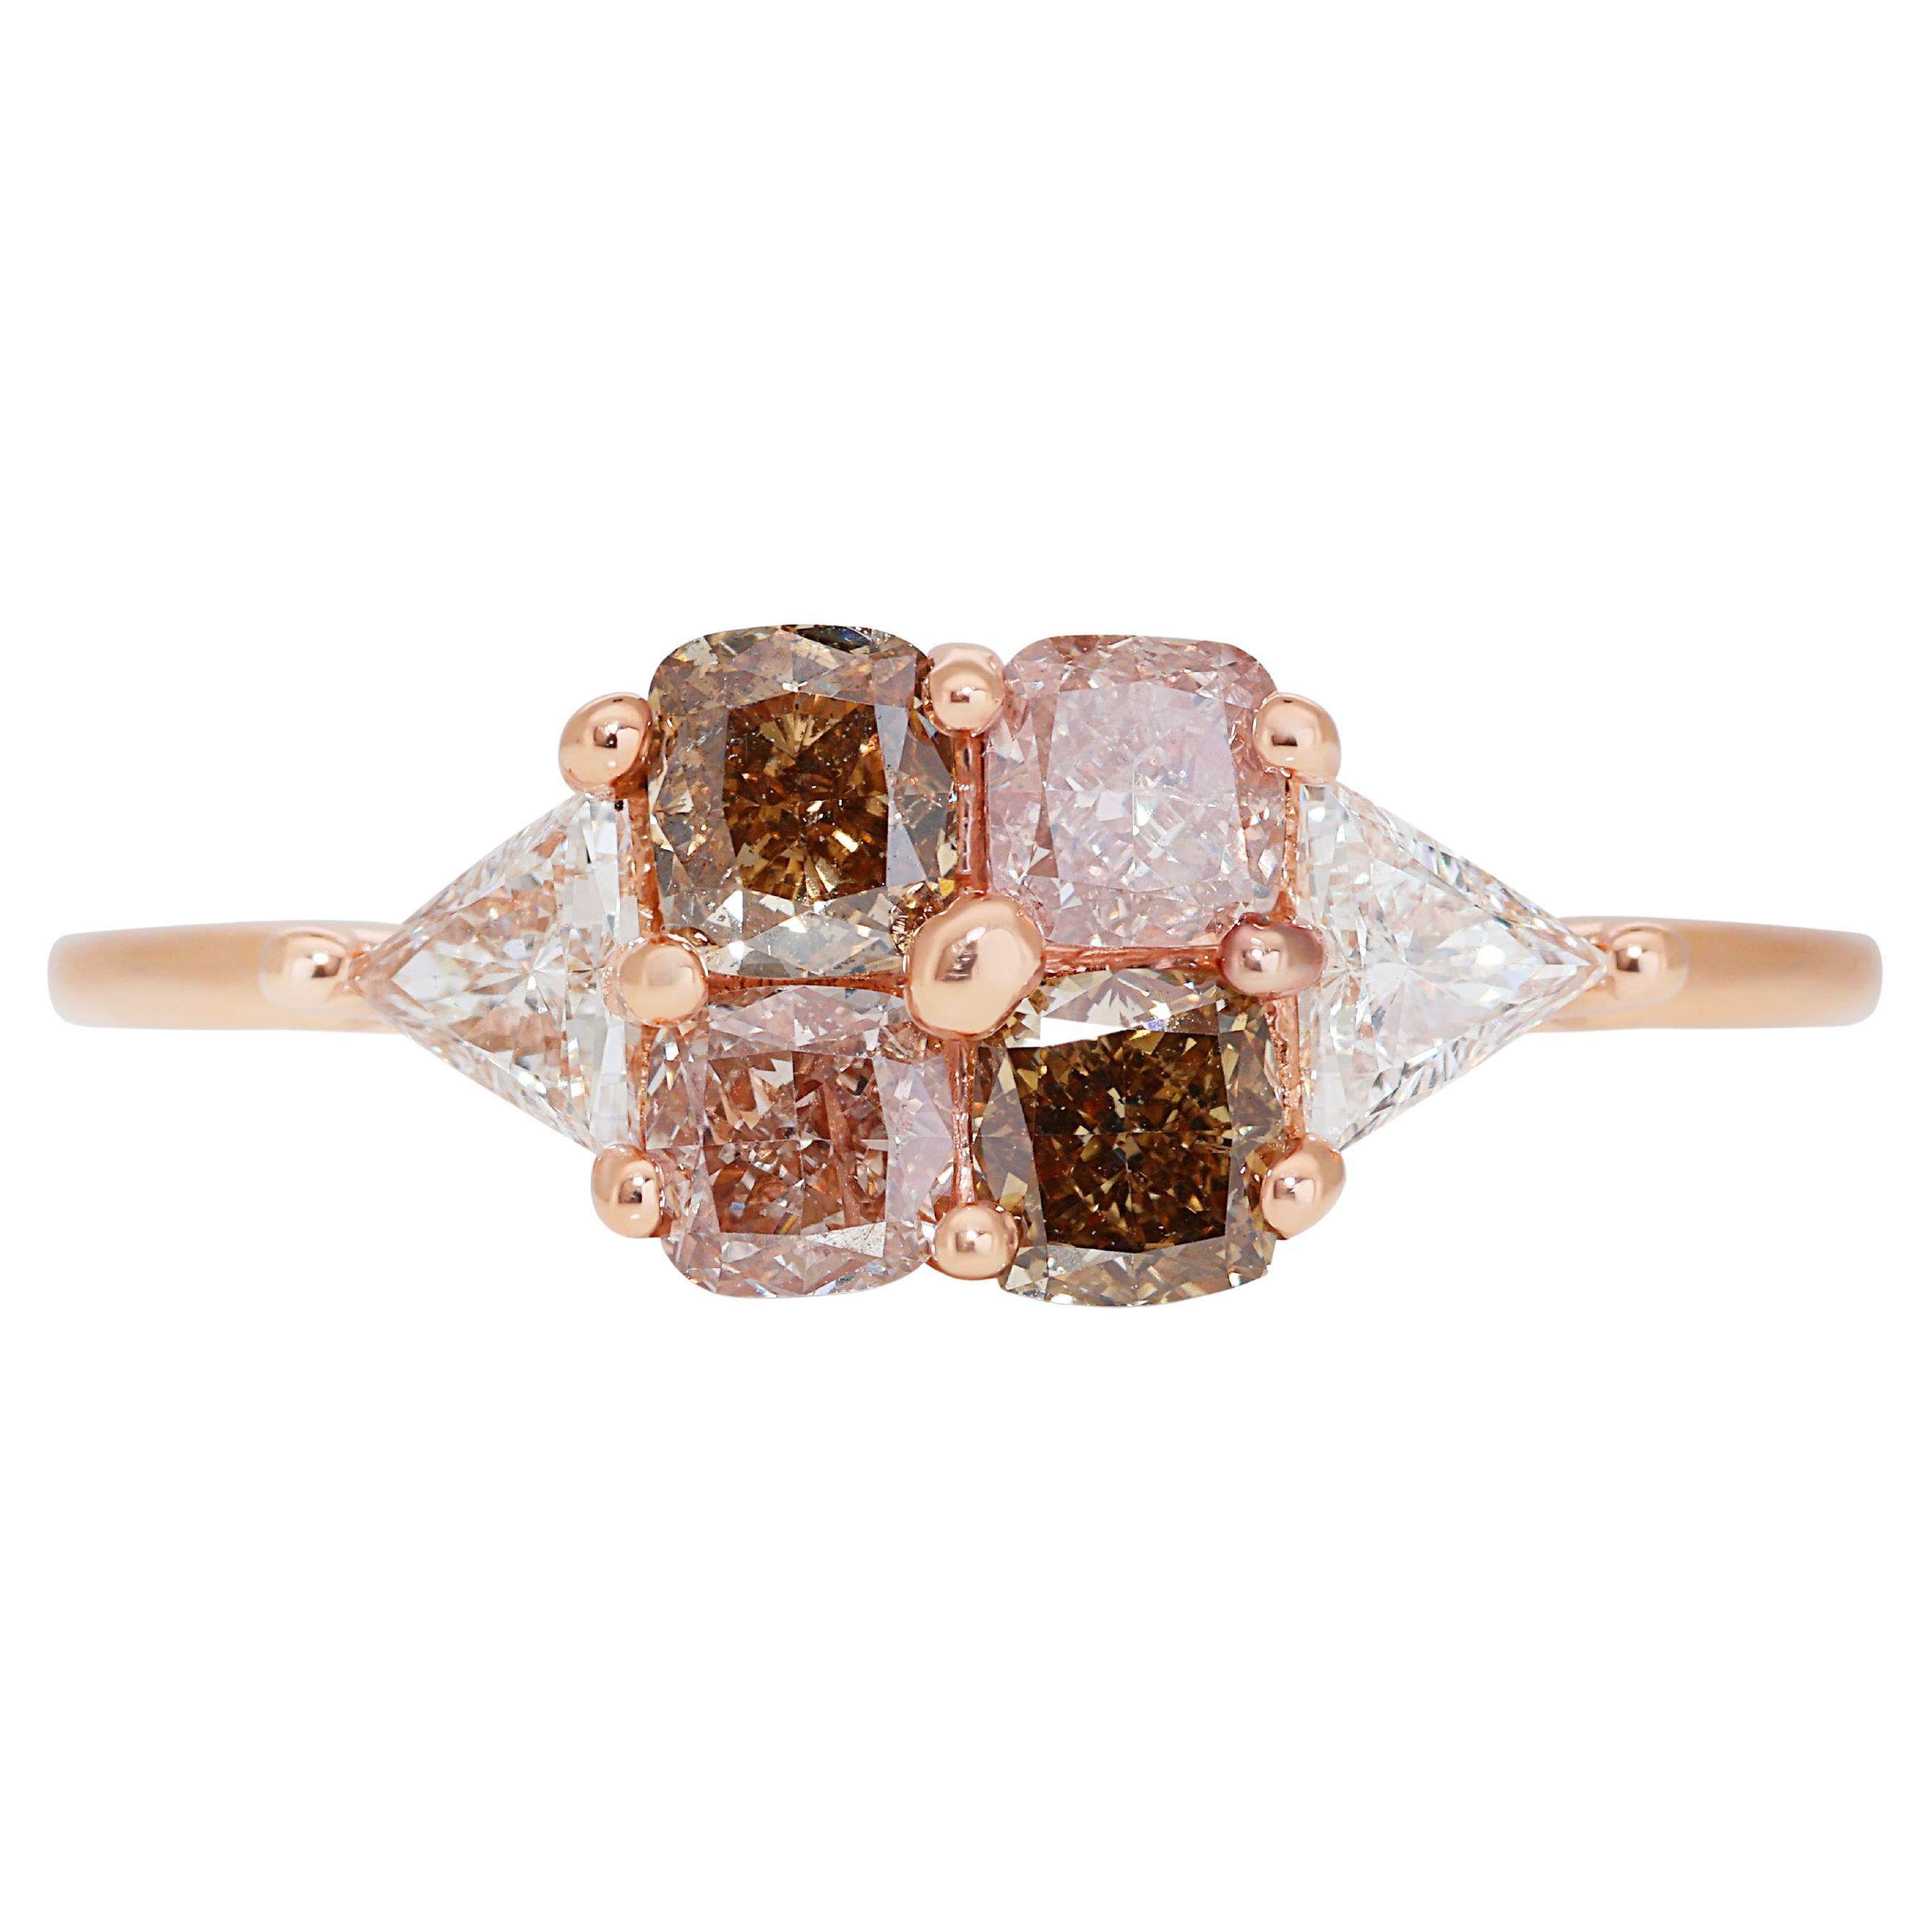 Vibrant One-of-a-Kind 14k Rose Gold Fancy-Colored Diamond Ring w/1.31 ct 